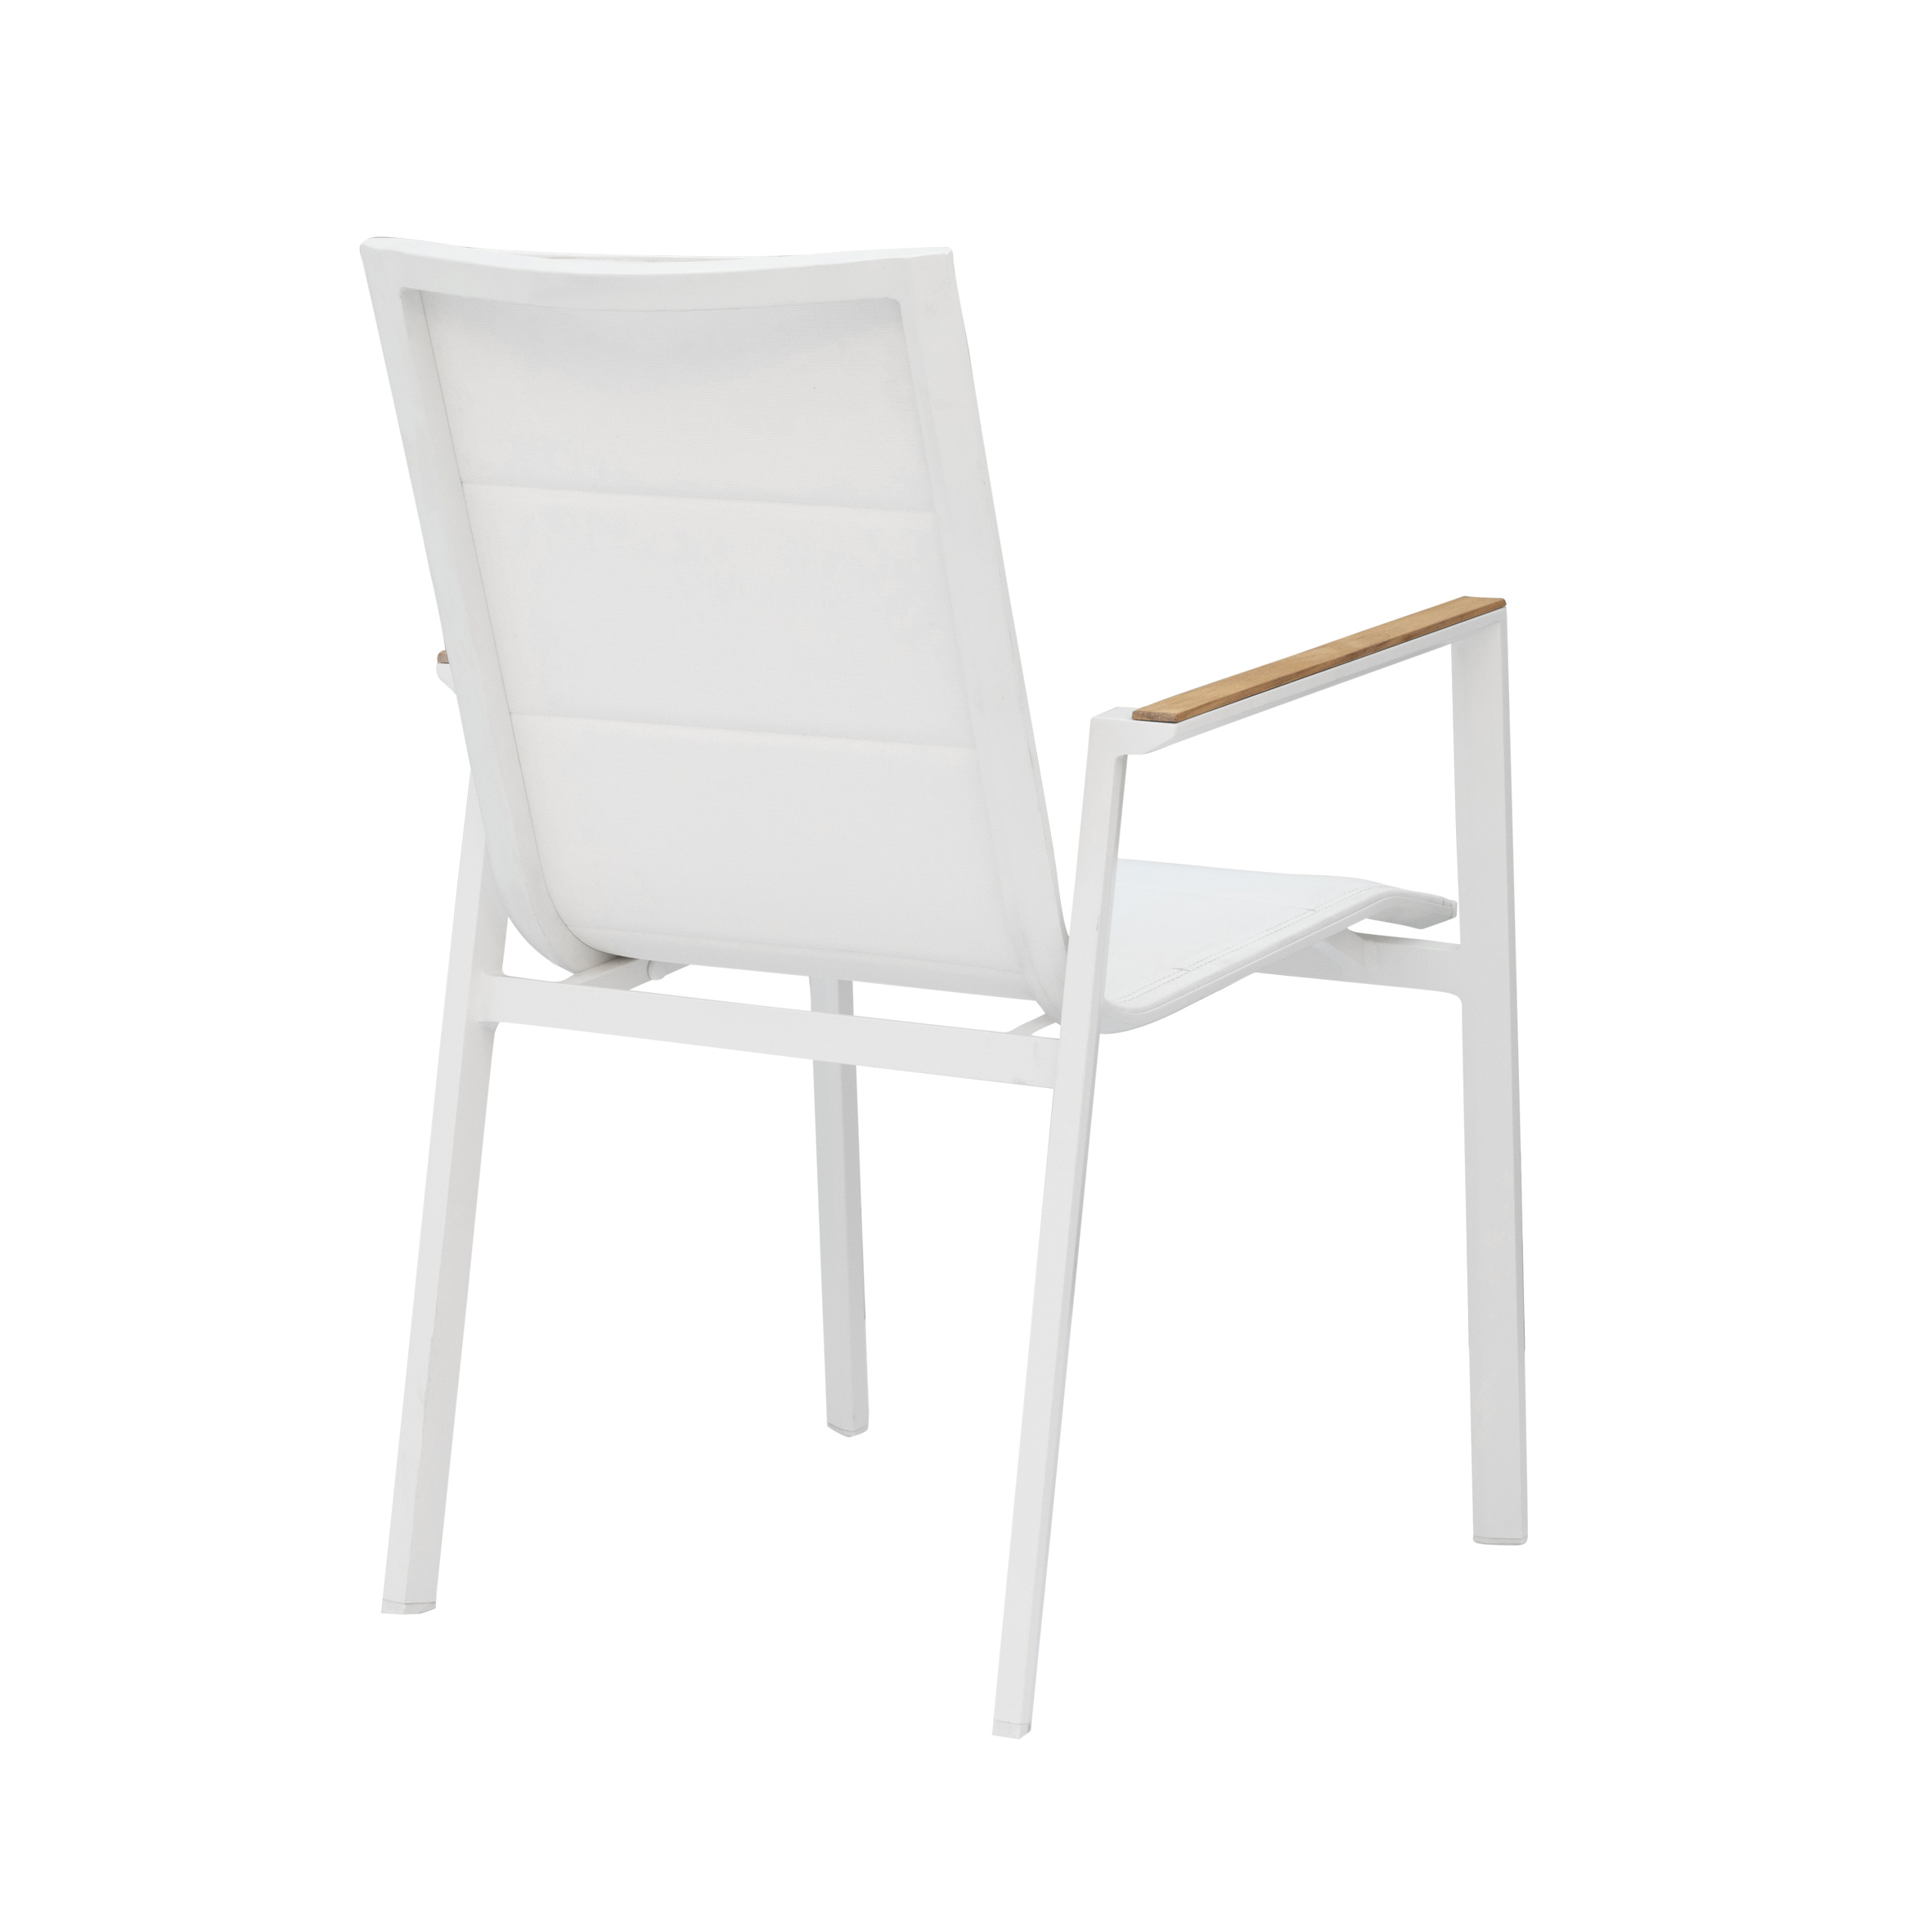 Luca textile chair with teak S2